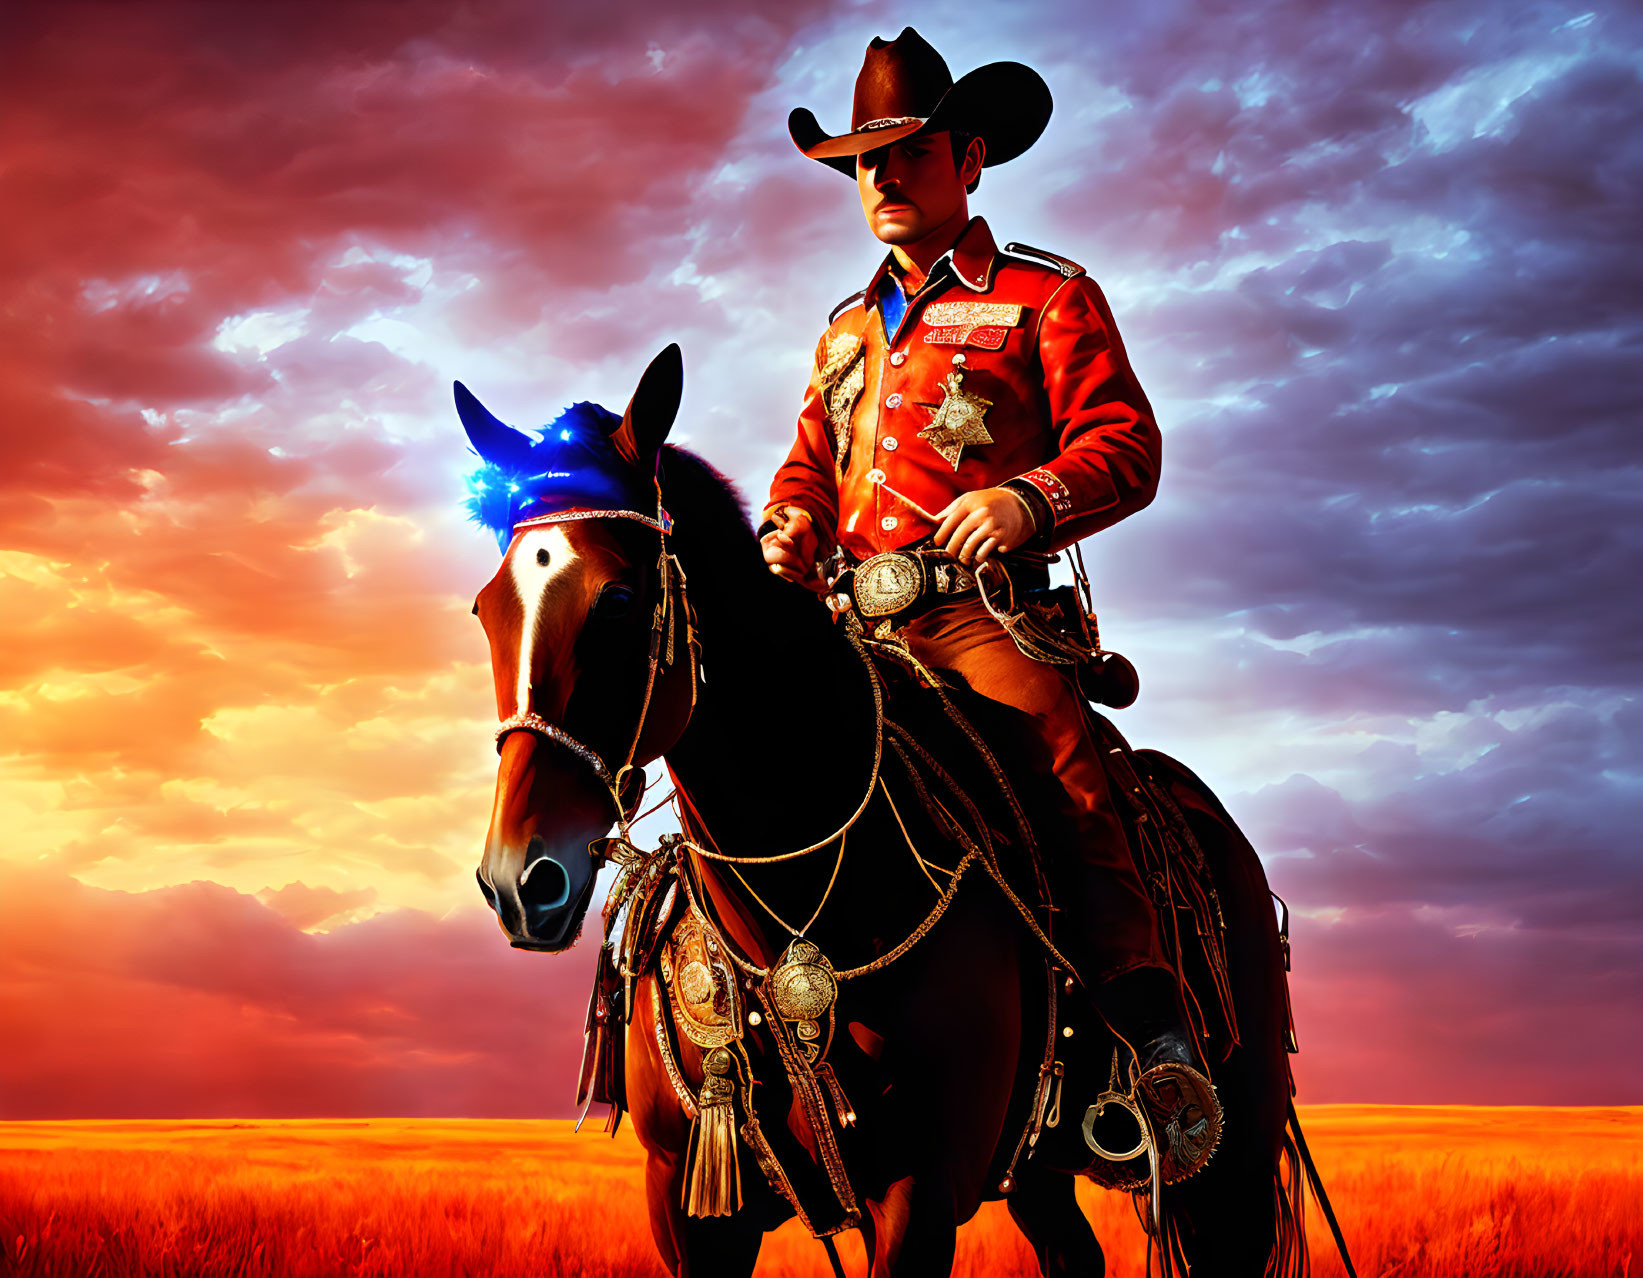 Person in Red and Gold Uniform on Horse at Sunset Sky